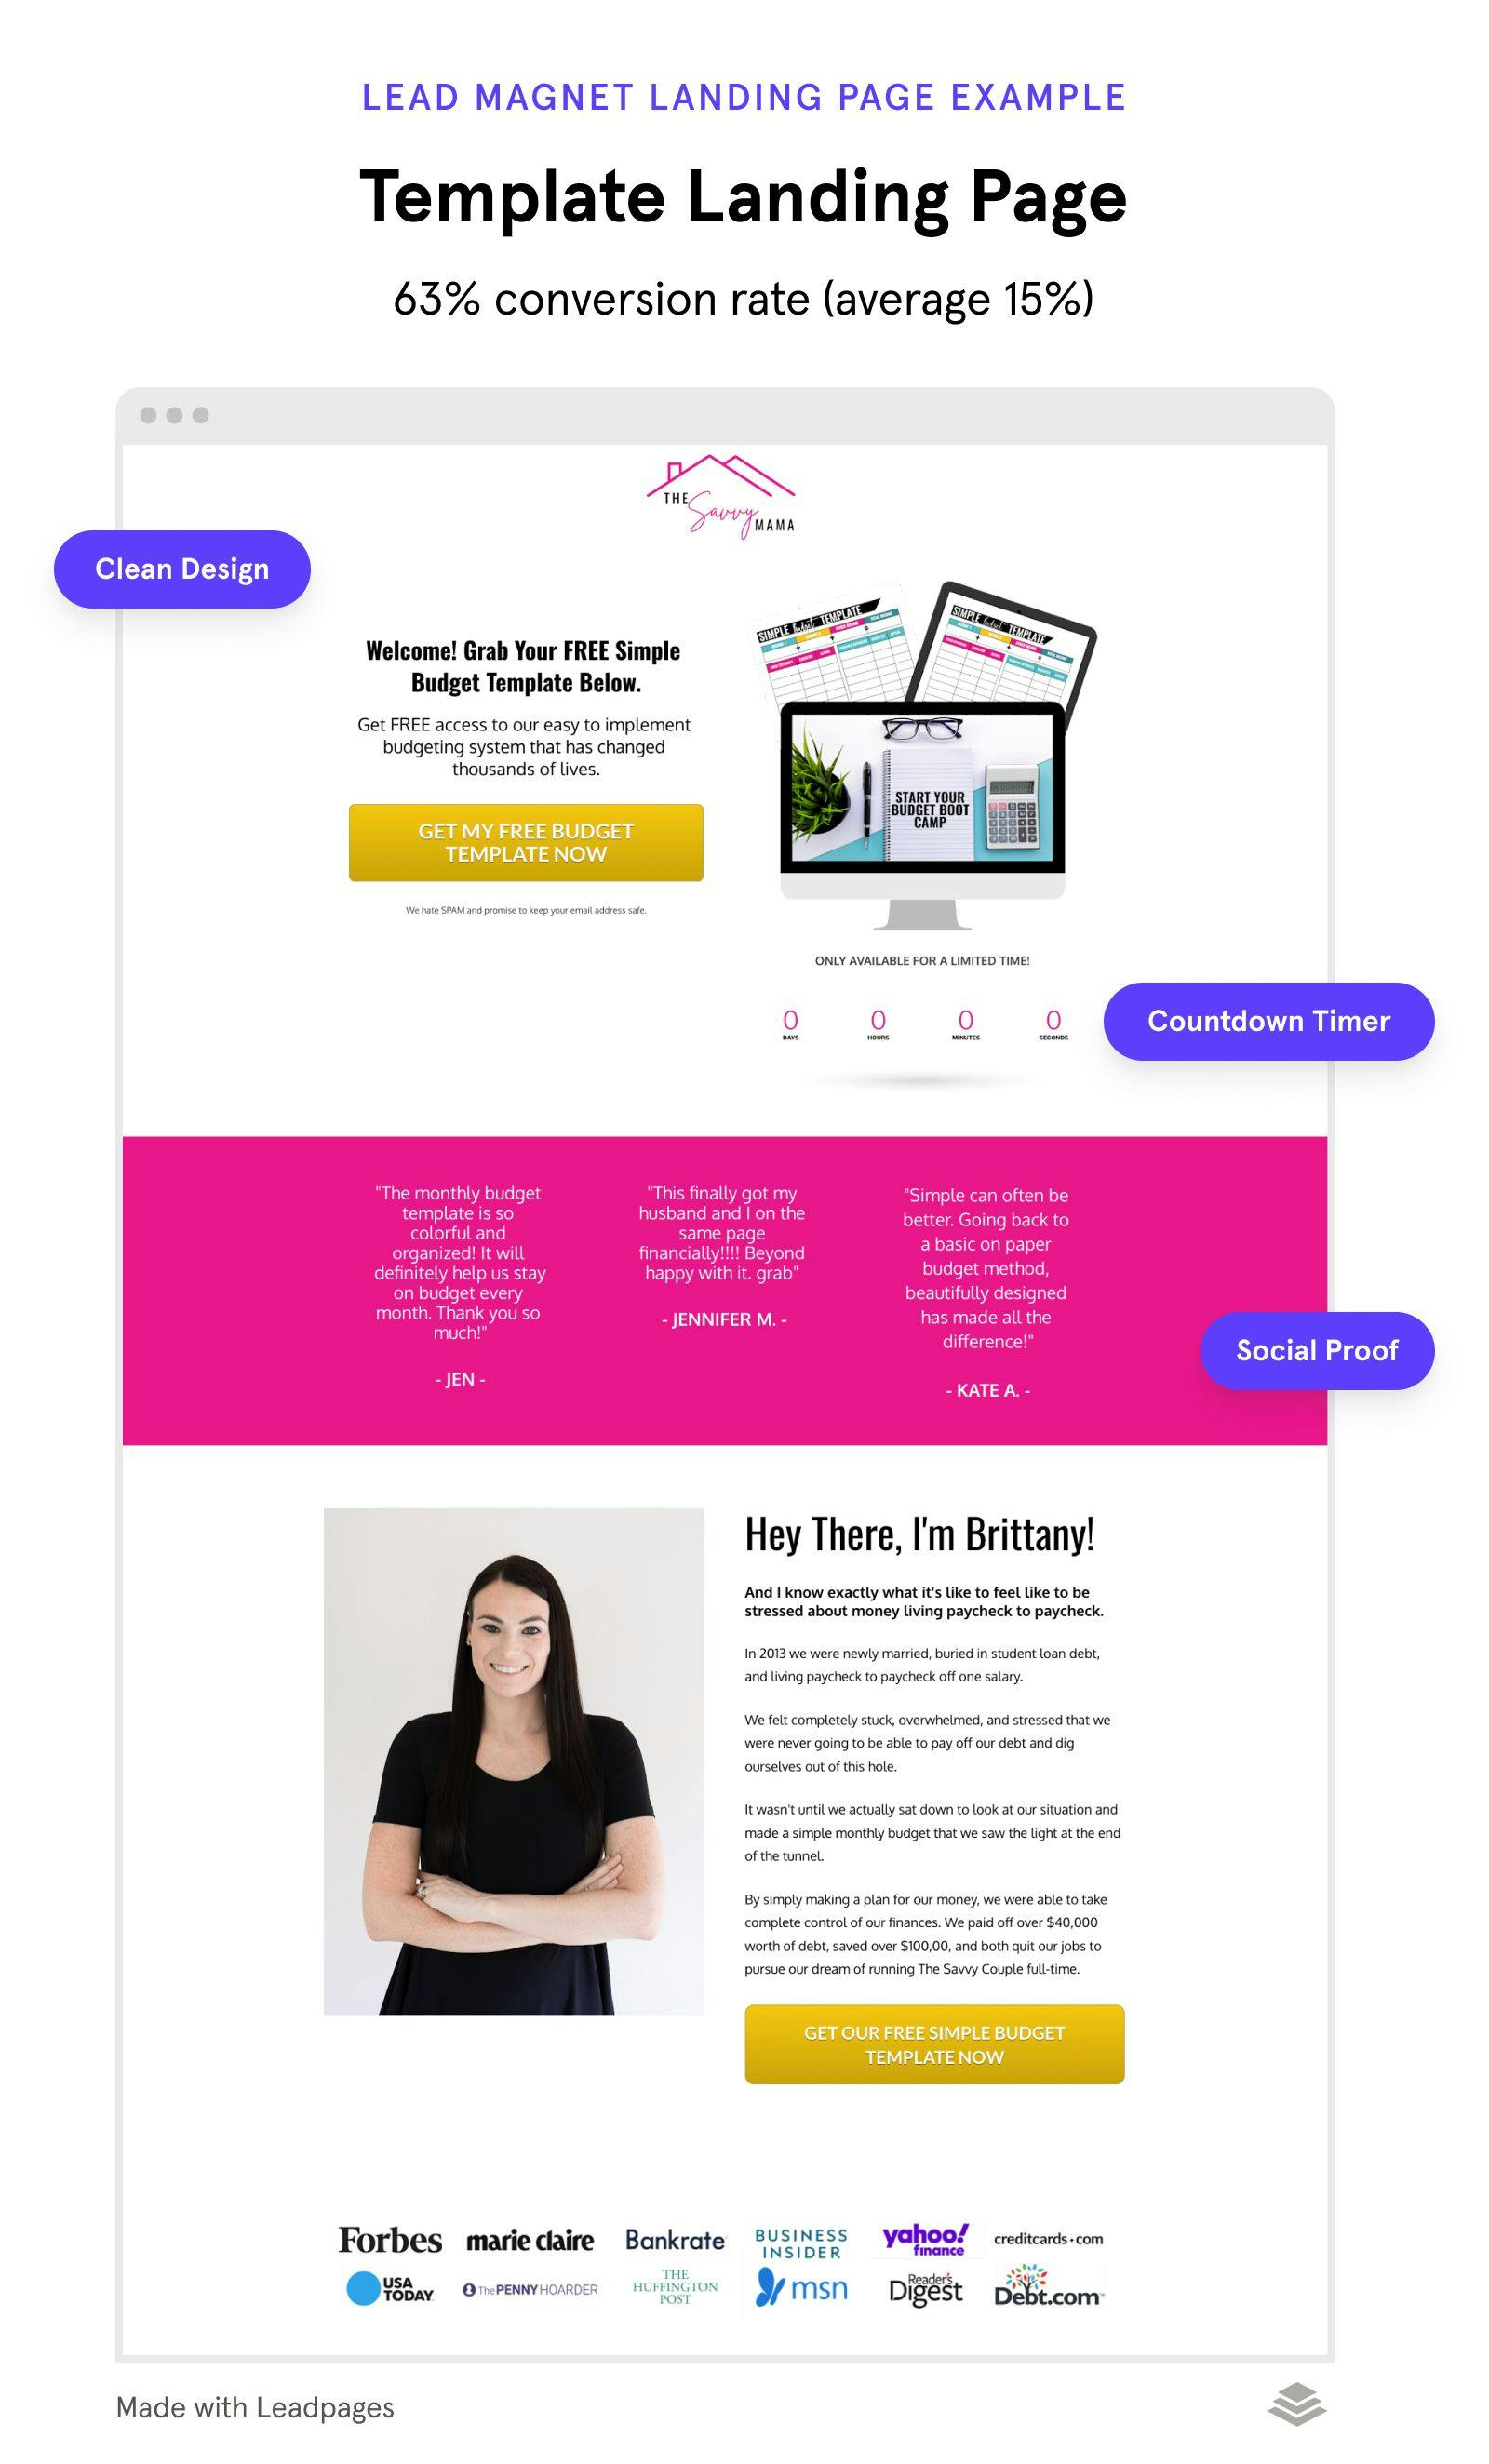 Template lead magnet landing page example